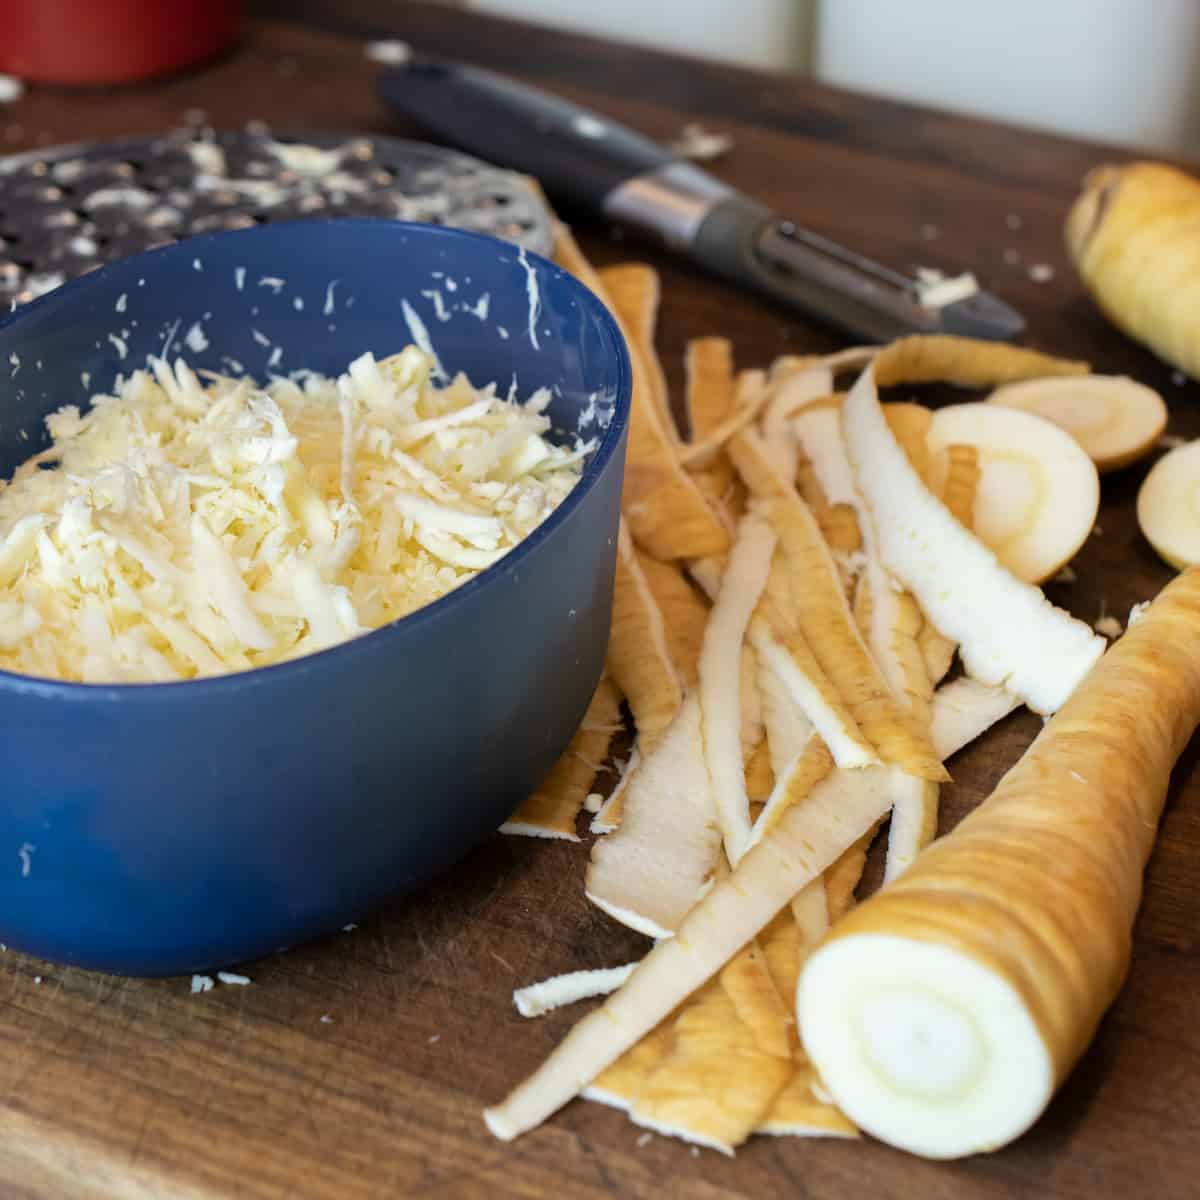 Grated parsnips in an oval container.